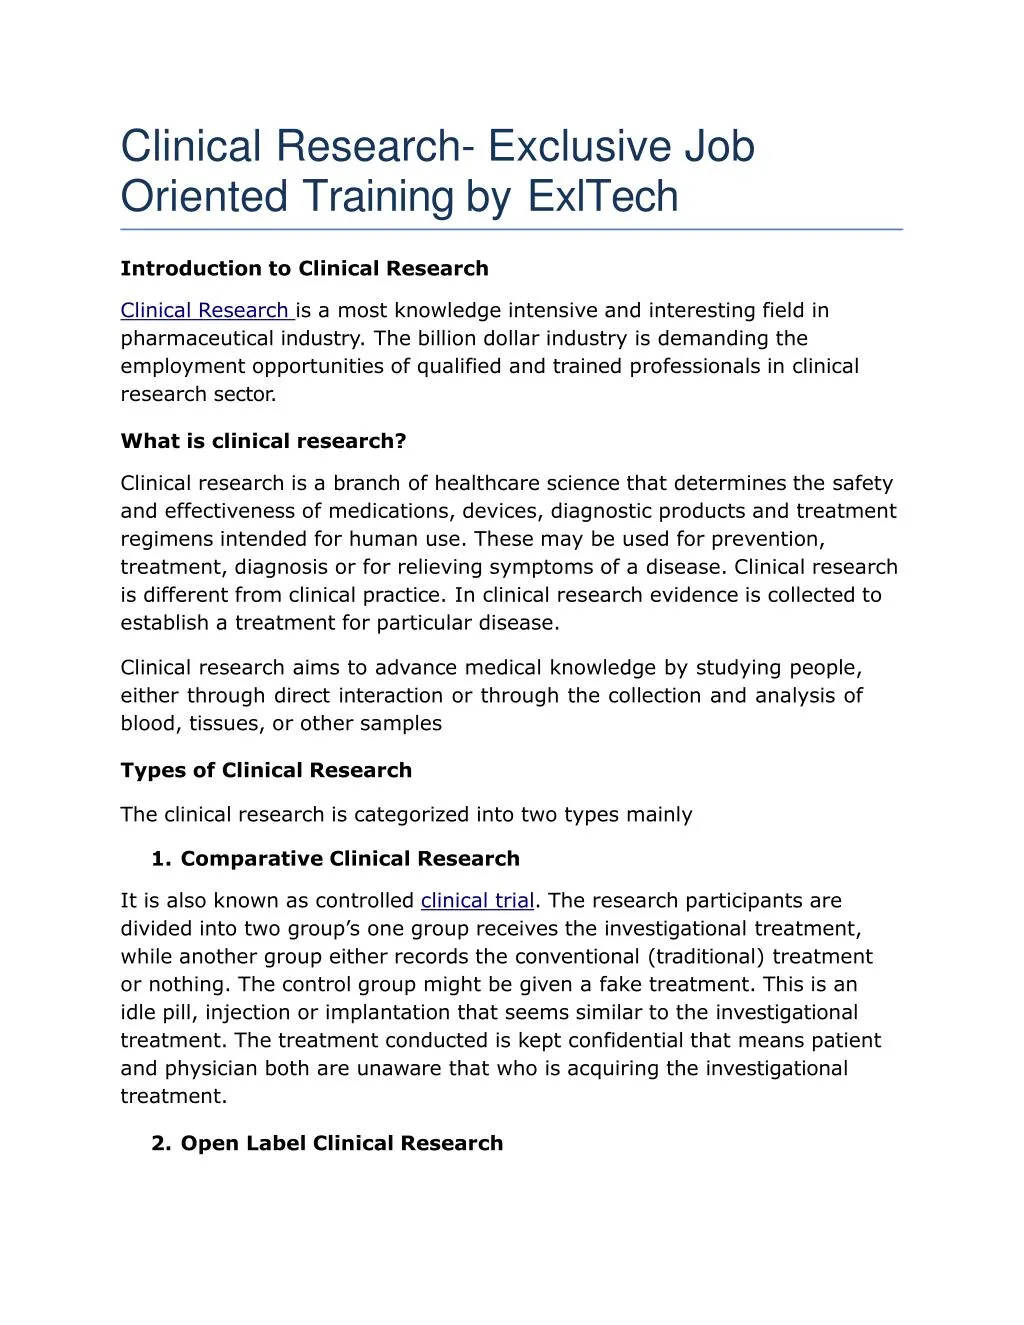 clinical research exclusive job oriented training by exltech